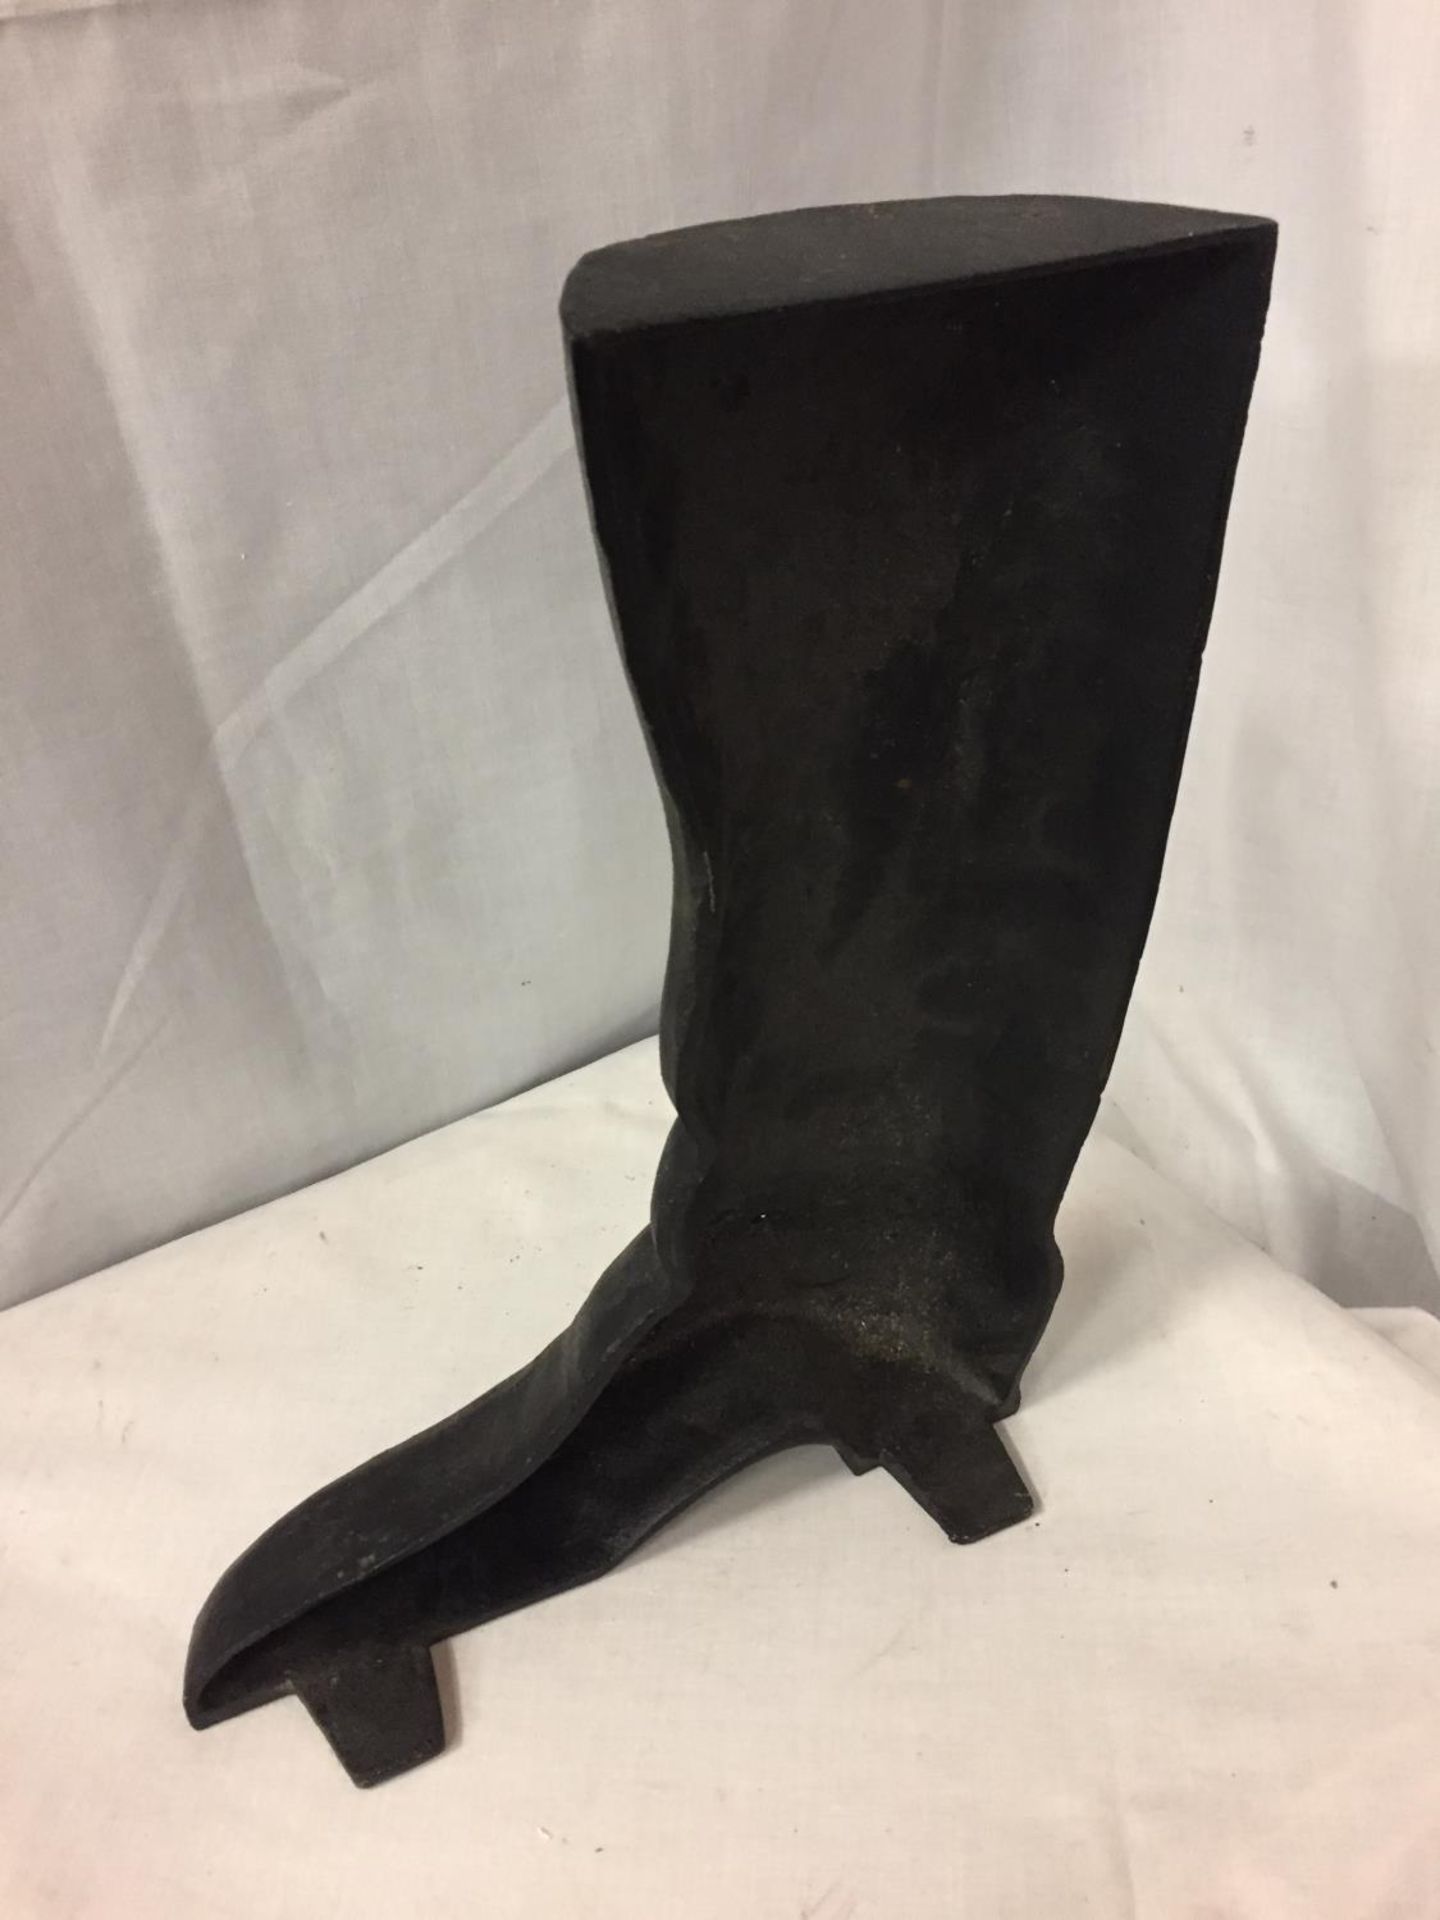 A CAST IRON BOOT SHAPED DOOR STOP - Image 3 of 3